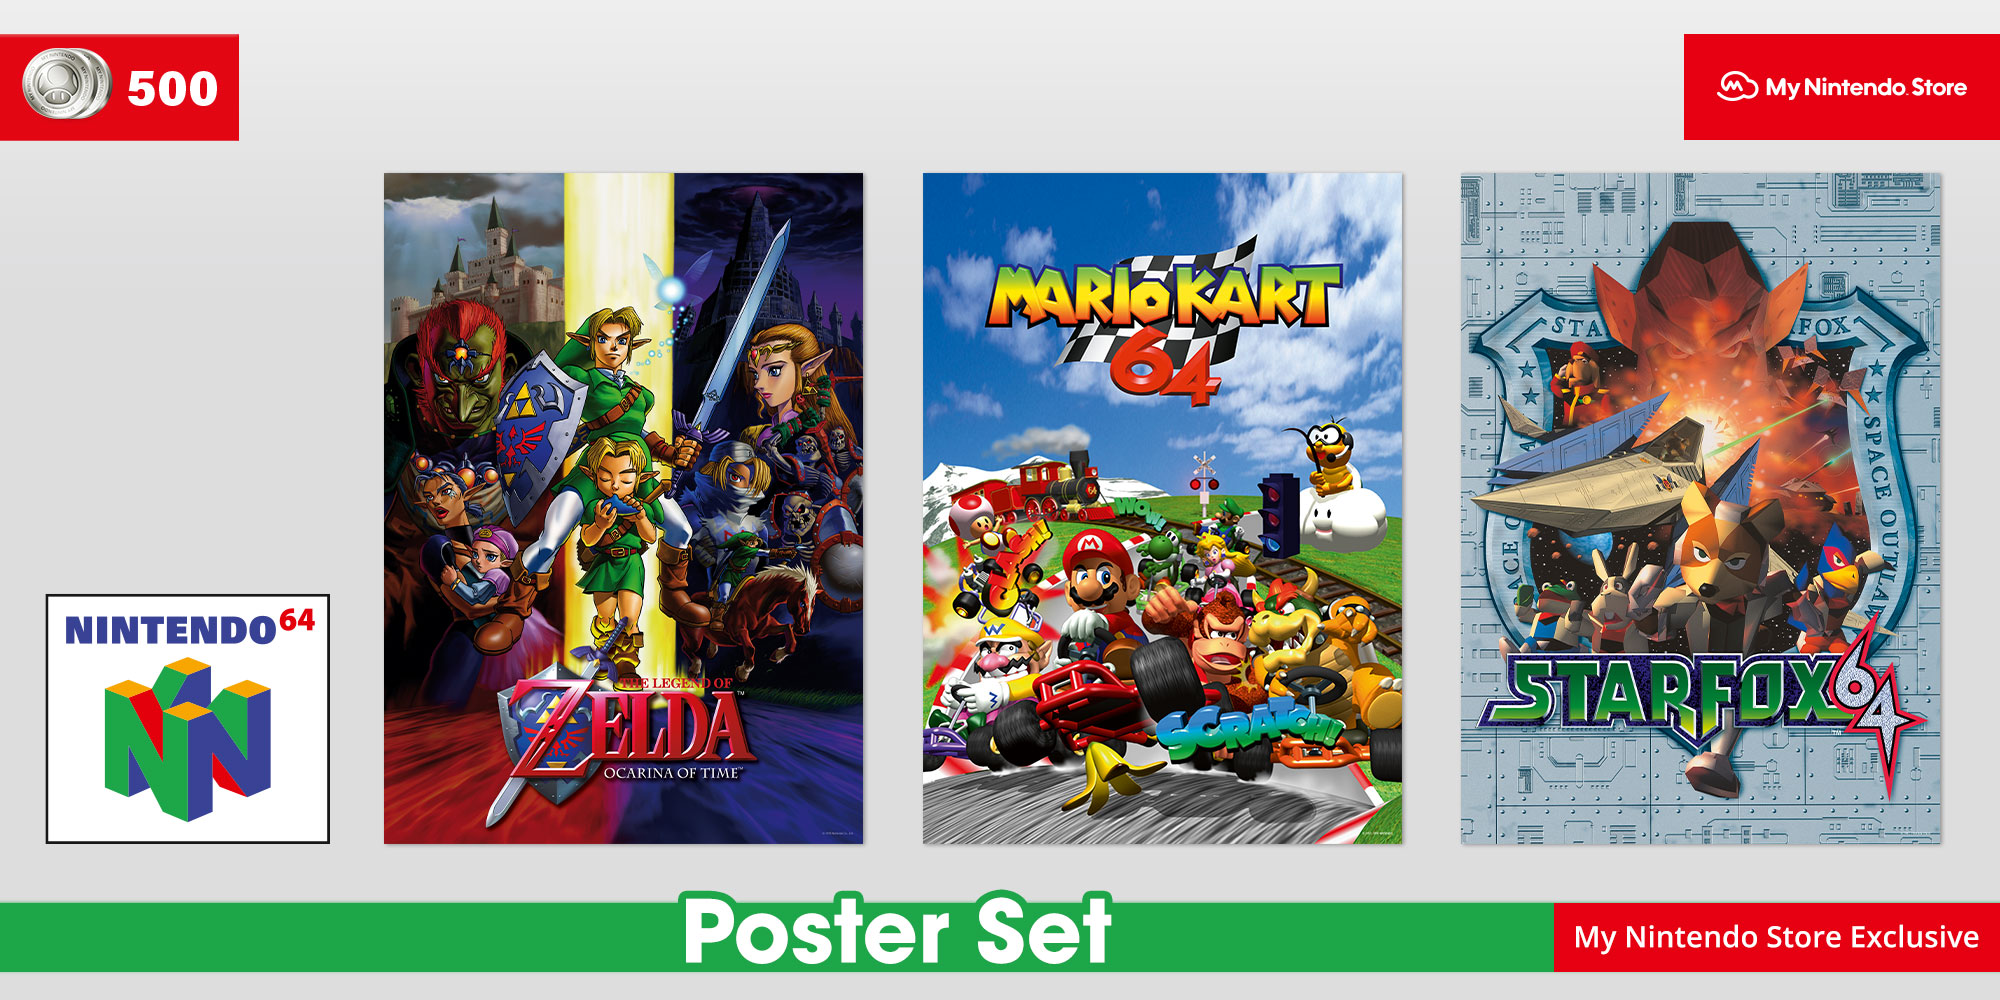 64 Poster Set Featuring Ocarina of Available from My Rewards in UK and - Zelda Dungeon